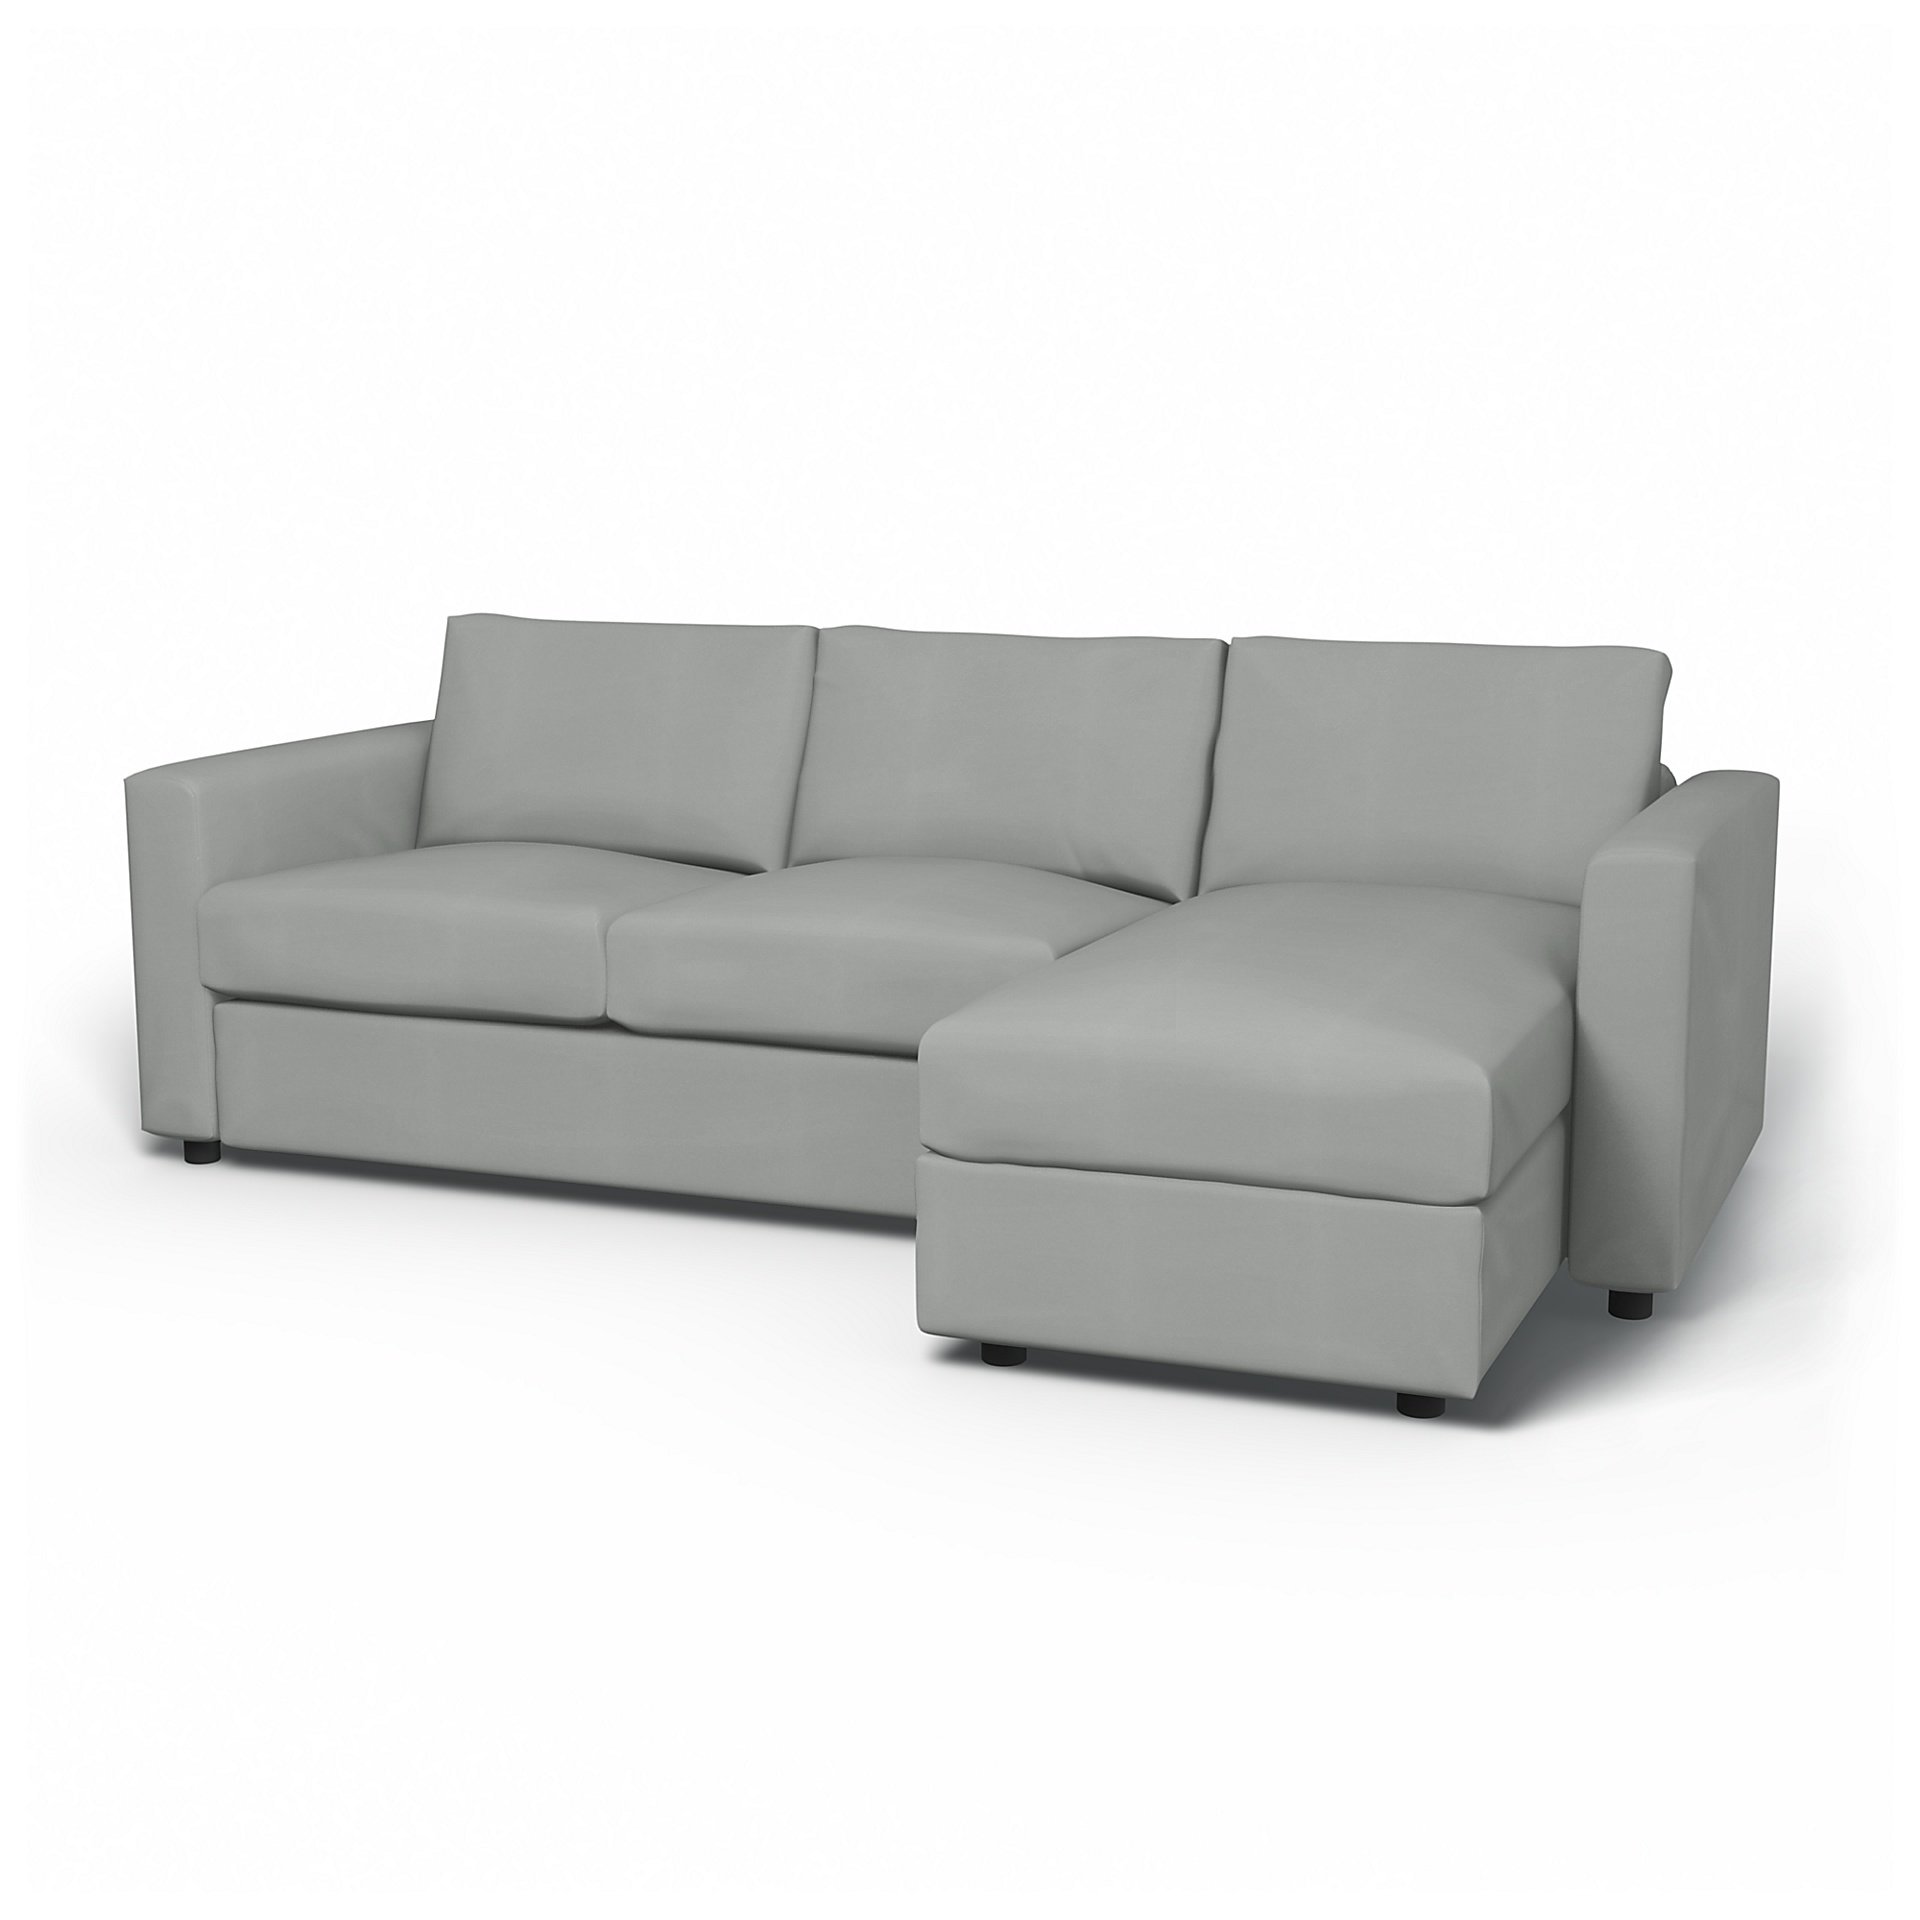 IKEA - Vimle 2 Seater Sofa with Chaise Cover, Silver Grey, Cotton - Bemz